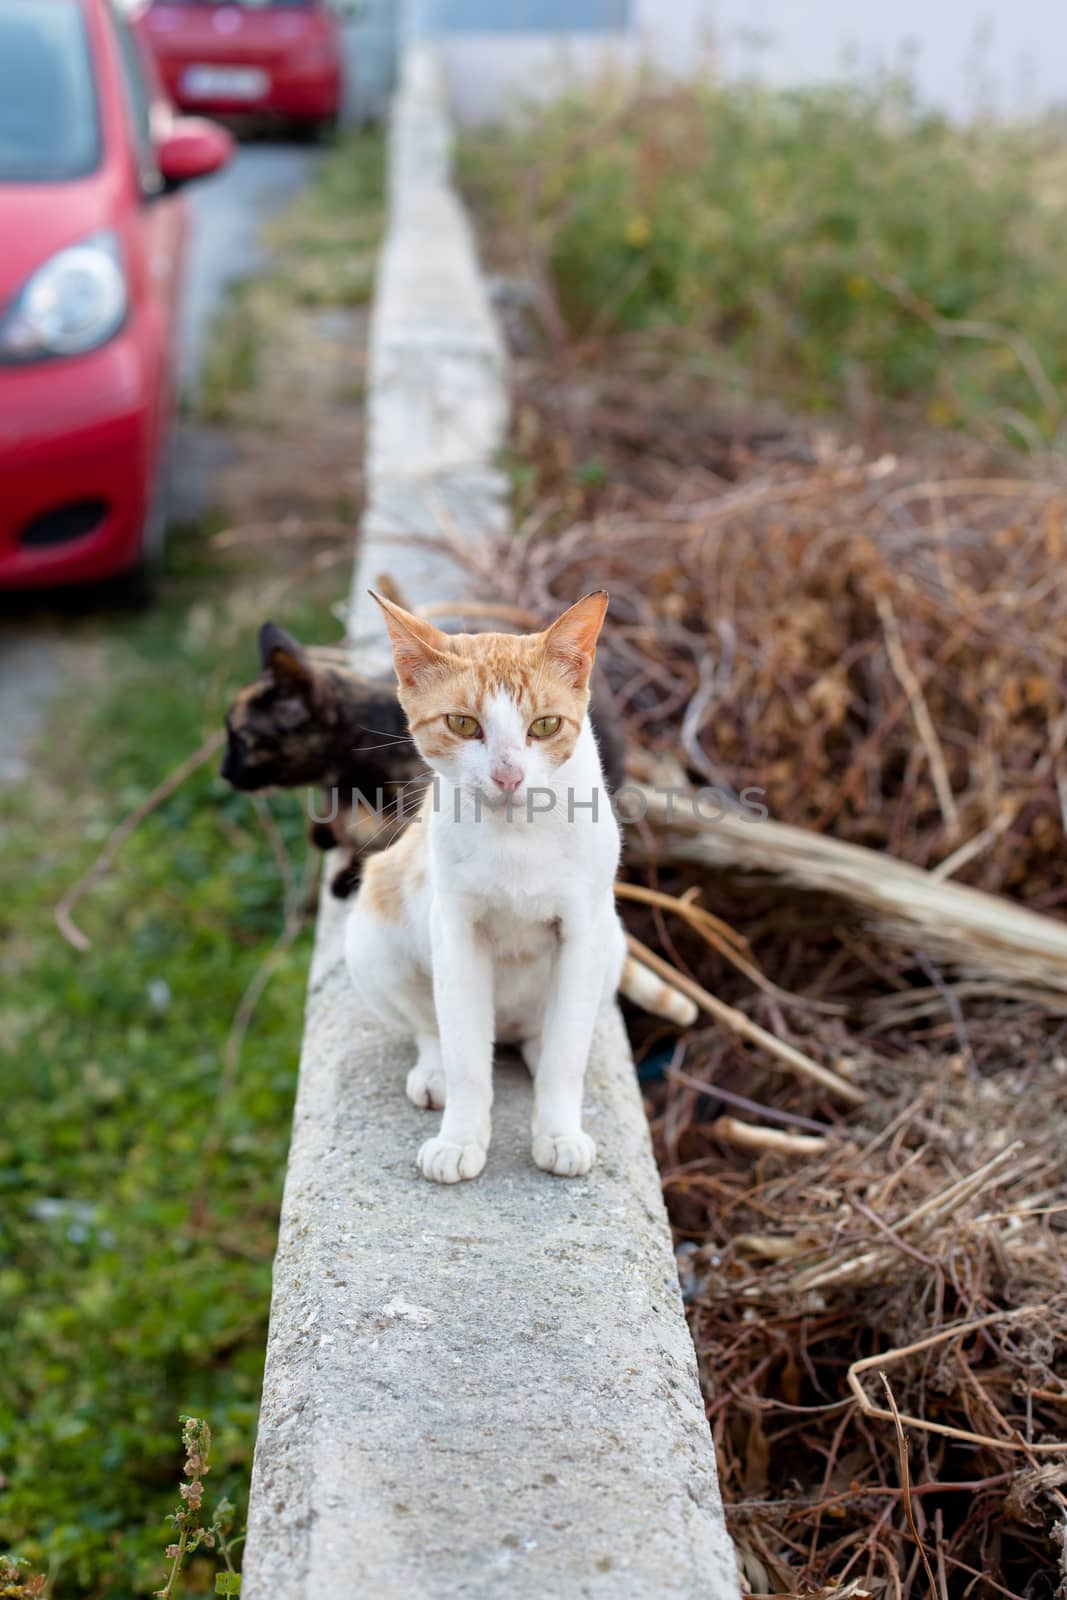 Outdoor cats by foaloce